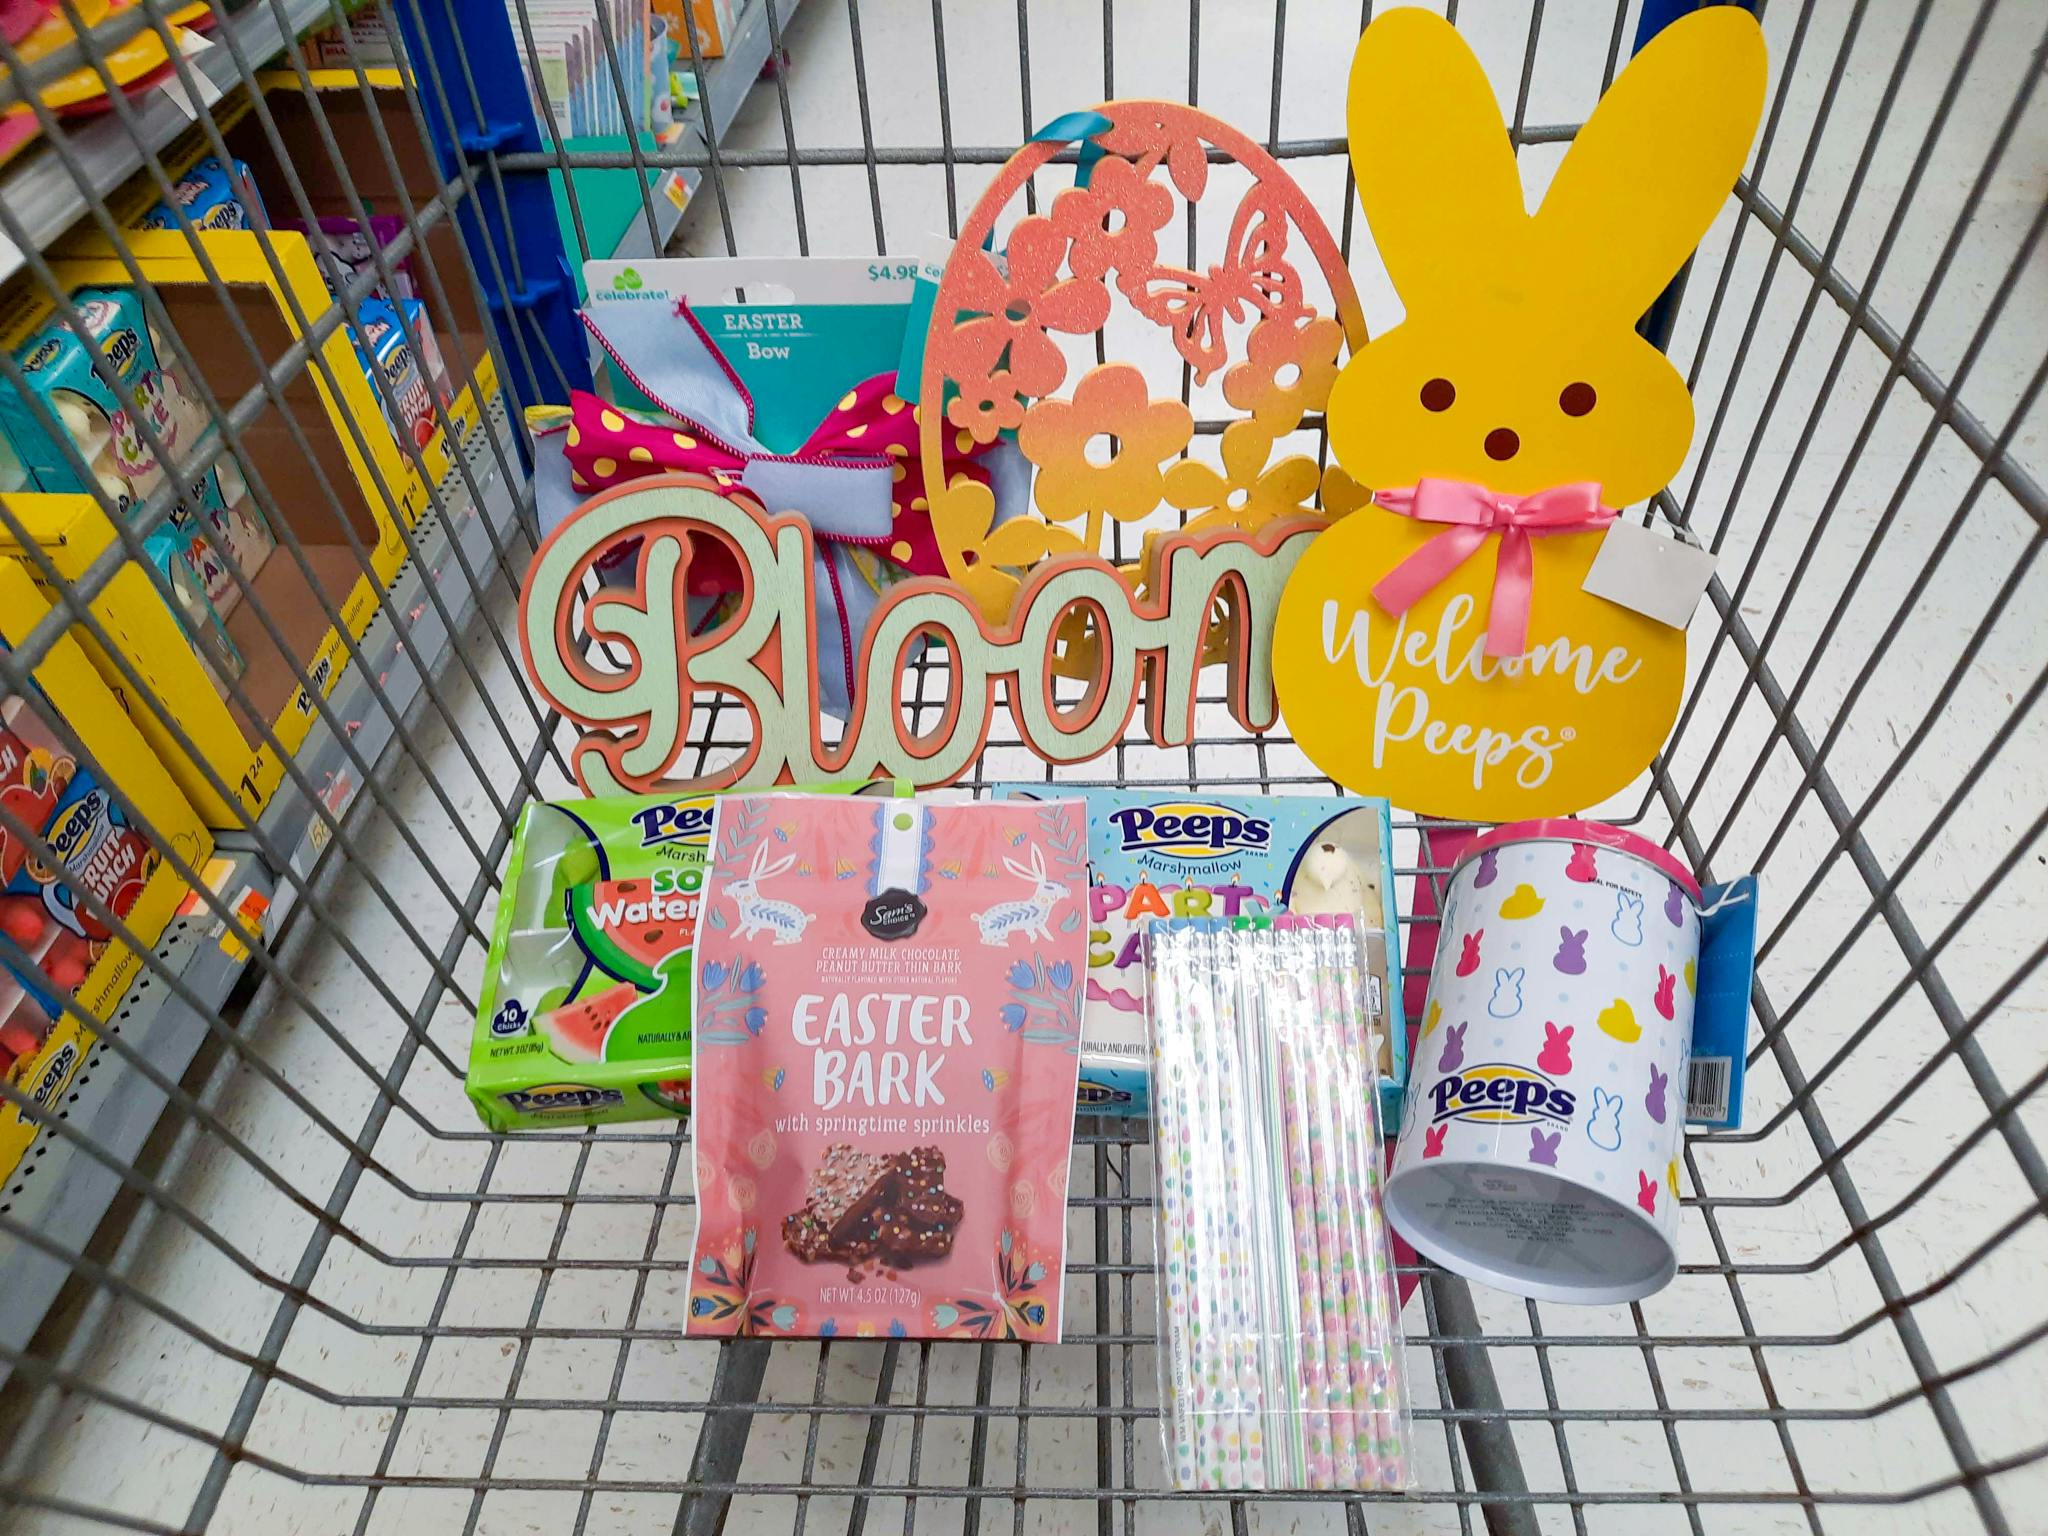 Easter Clearance items in Walmart shopping cart